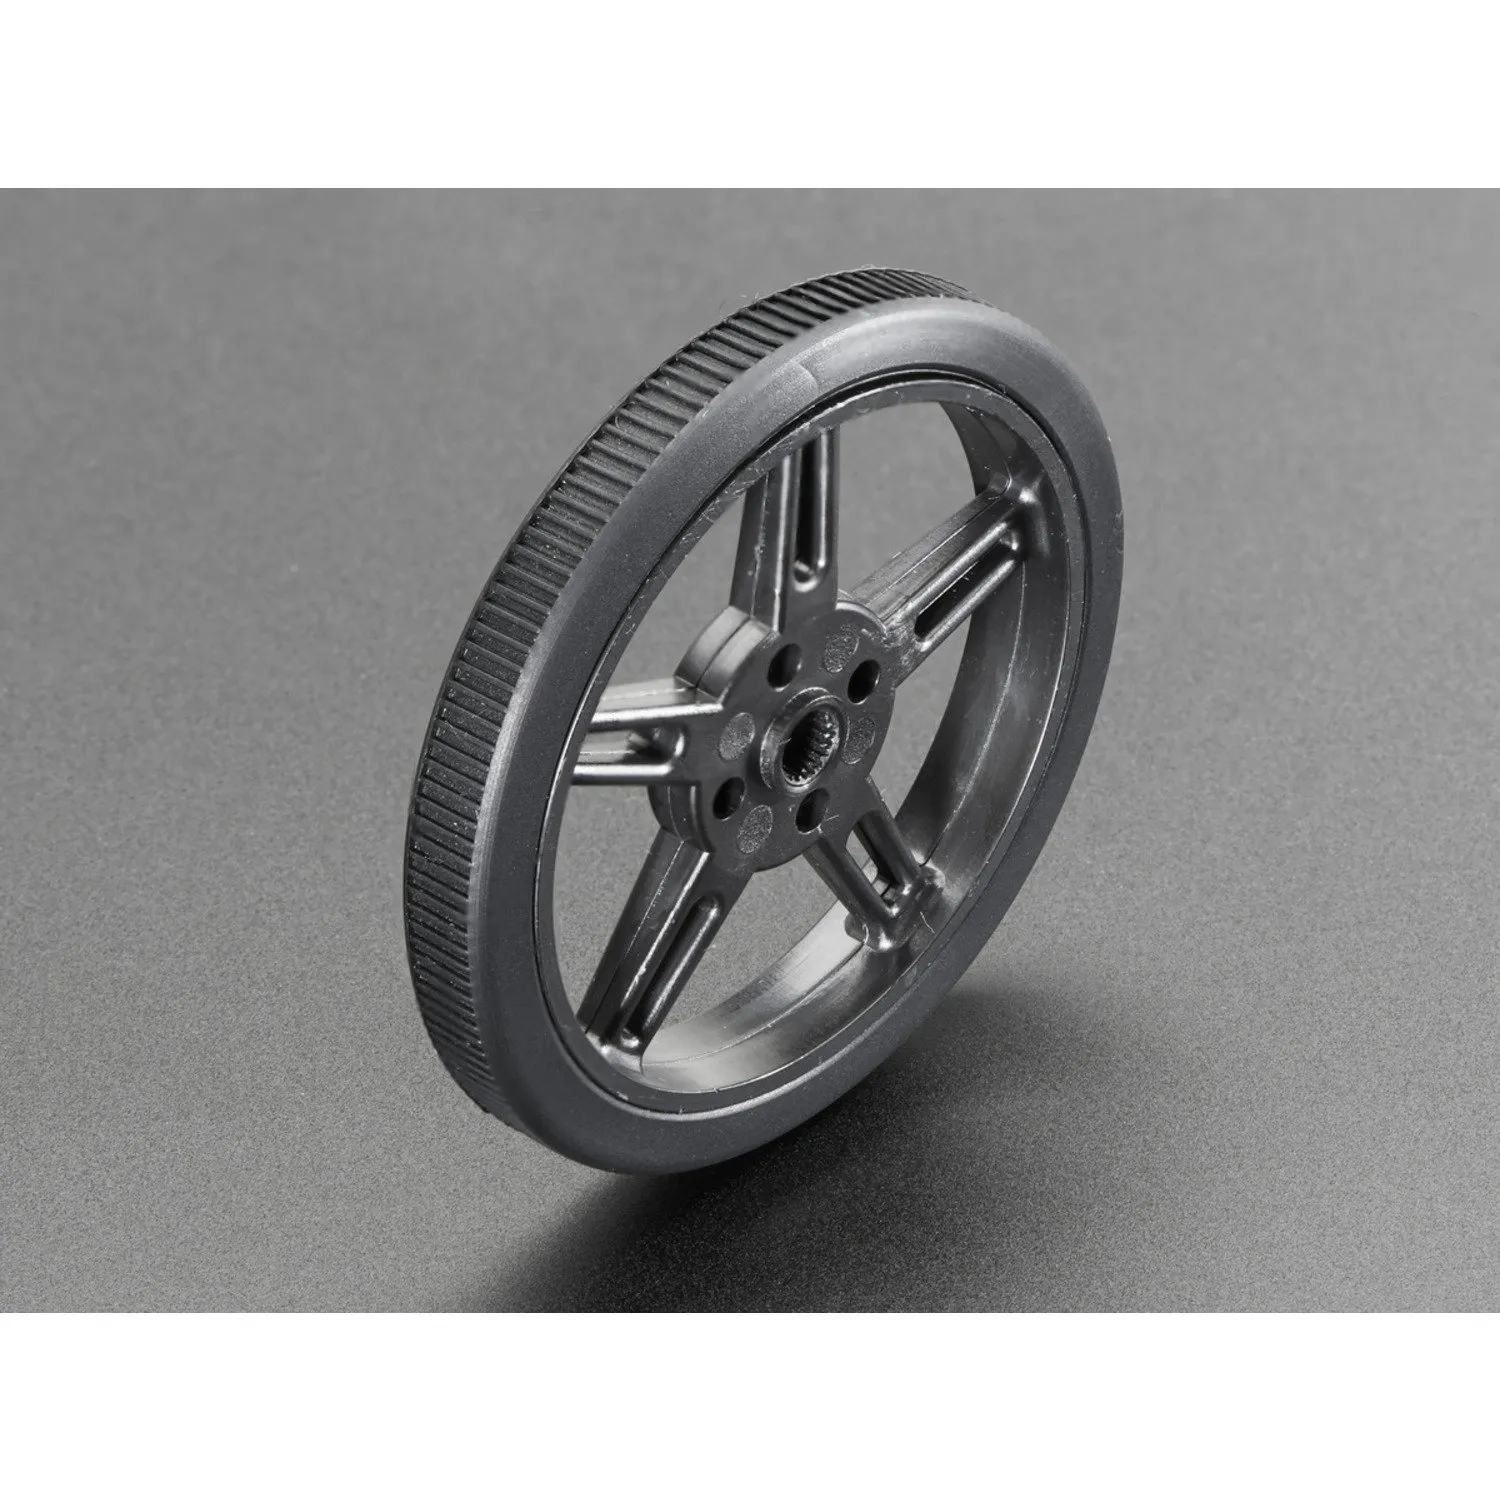 Photo of Wheel for Micro Continuous Rotation FS90R Servo